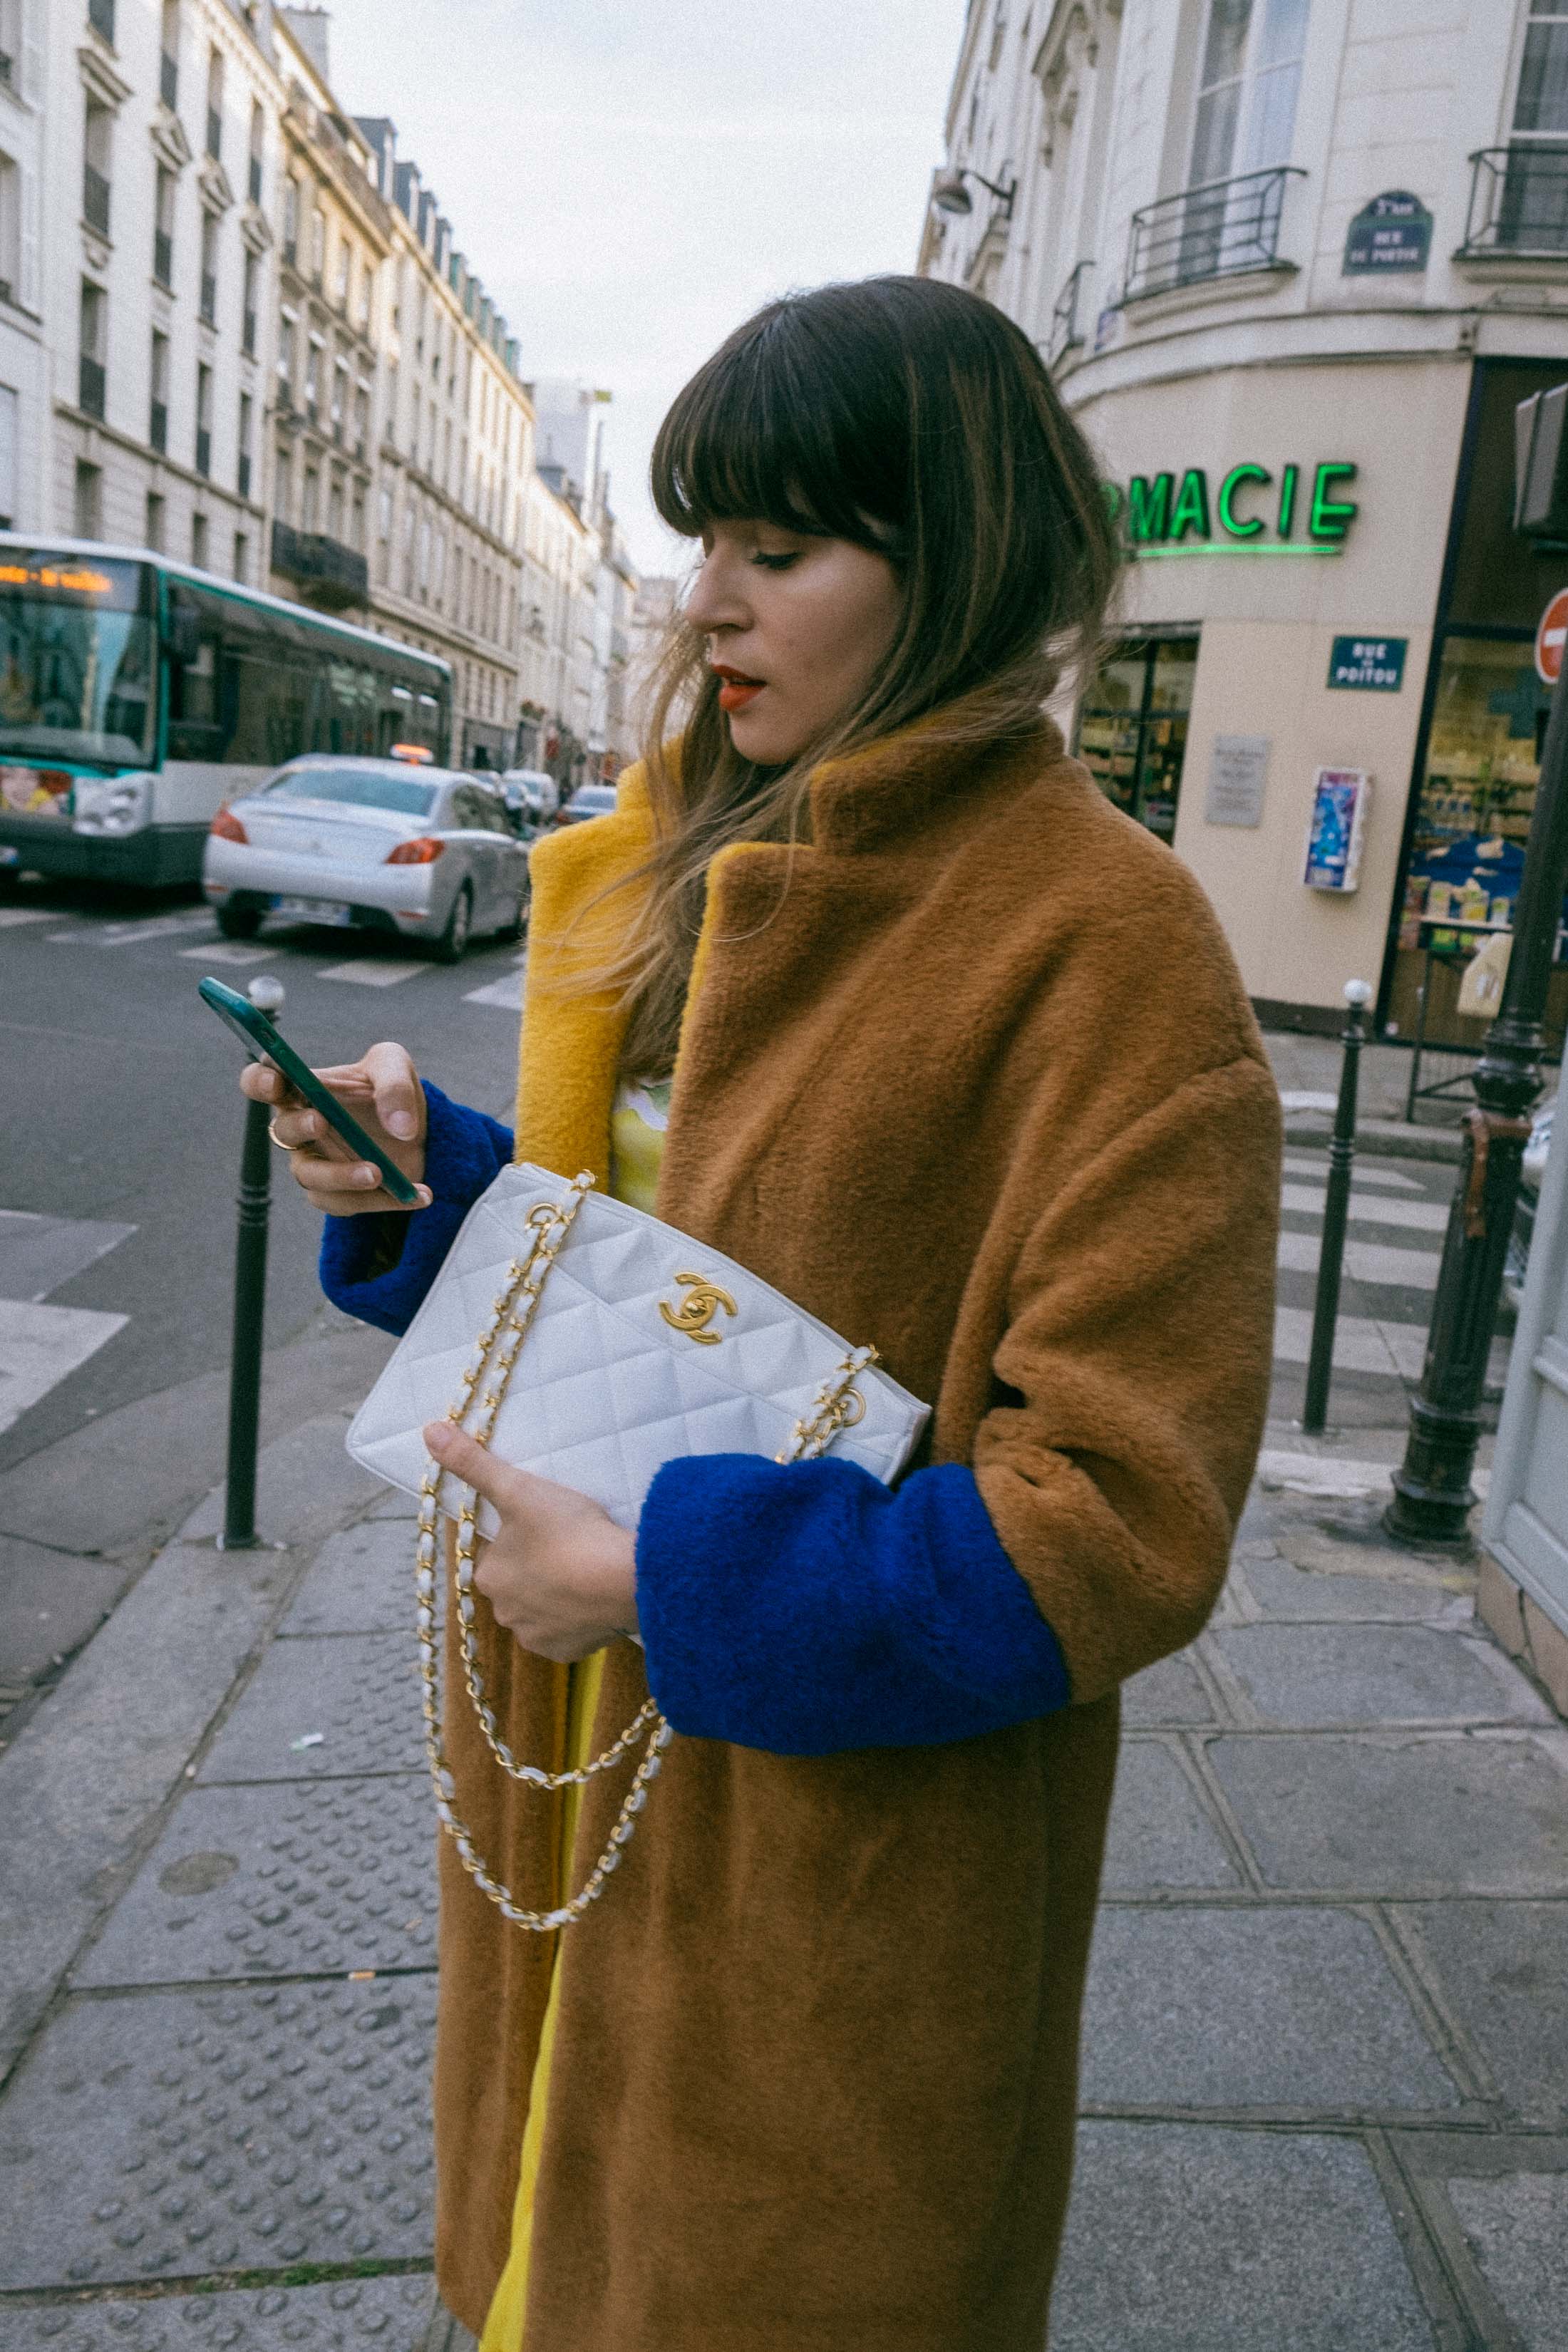 Maristella wears a coat from Mango and vintage white Chanel bag in Le Marais Paris